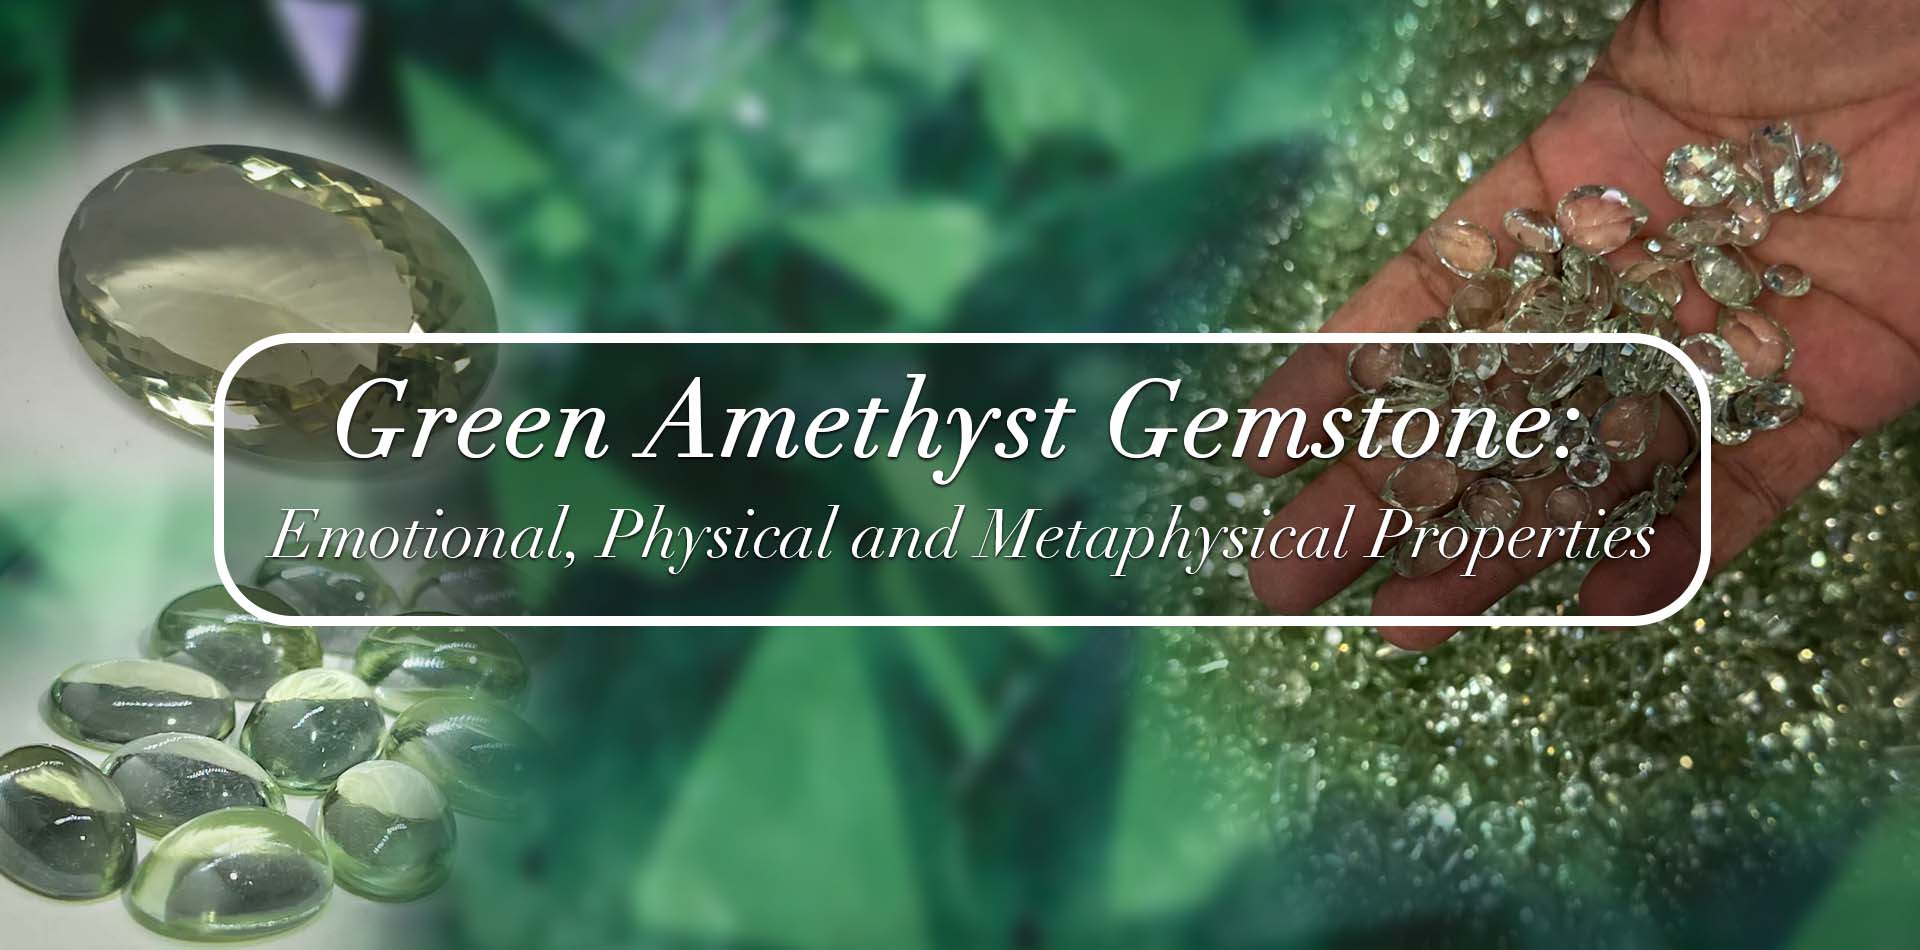 Green Amethyst Gemstone: Emotions, Physical, and Metaphysical Properties